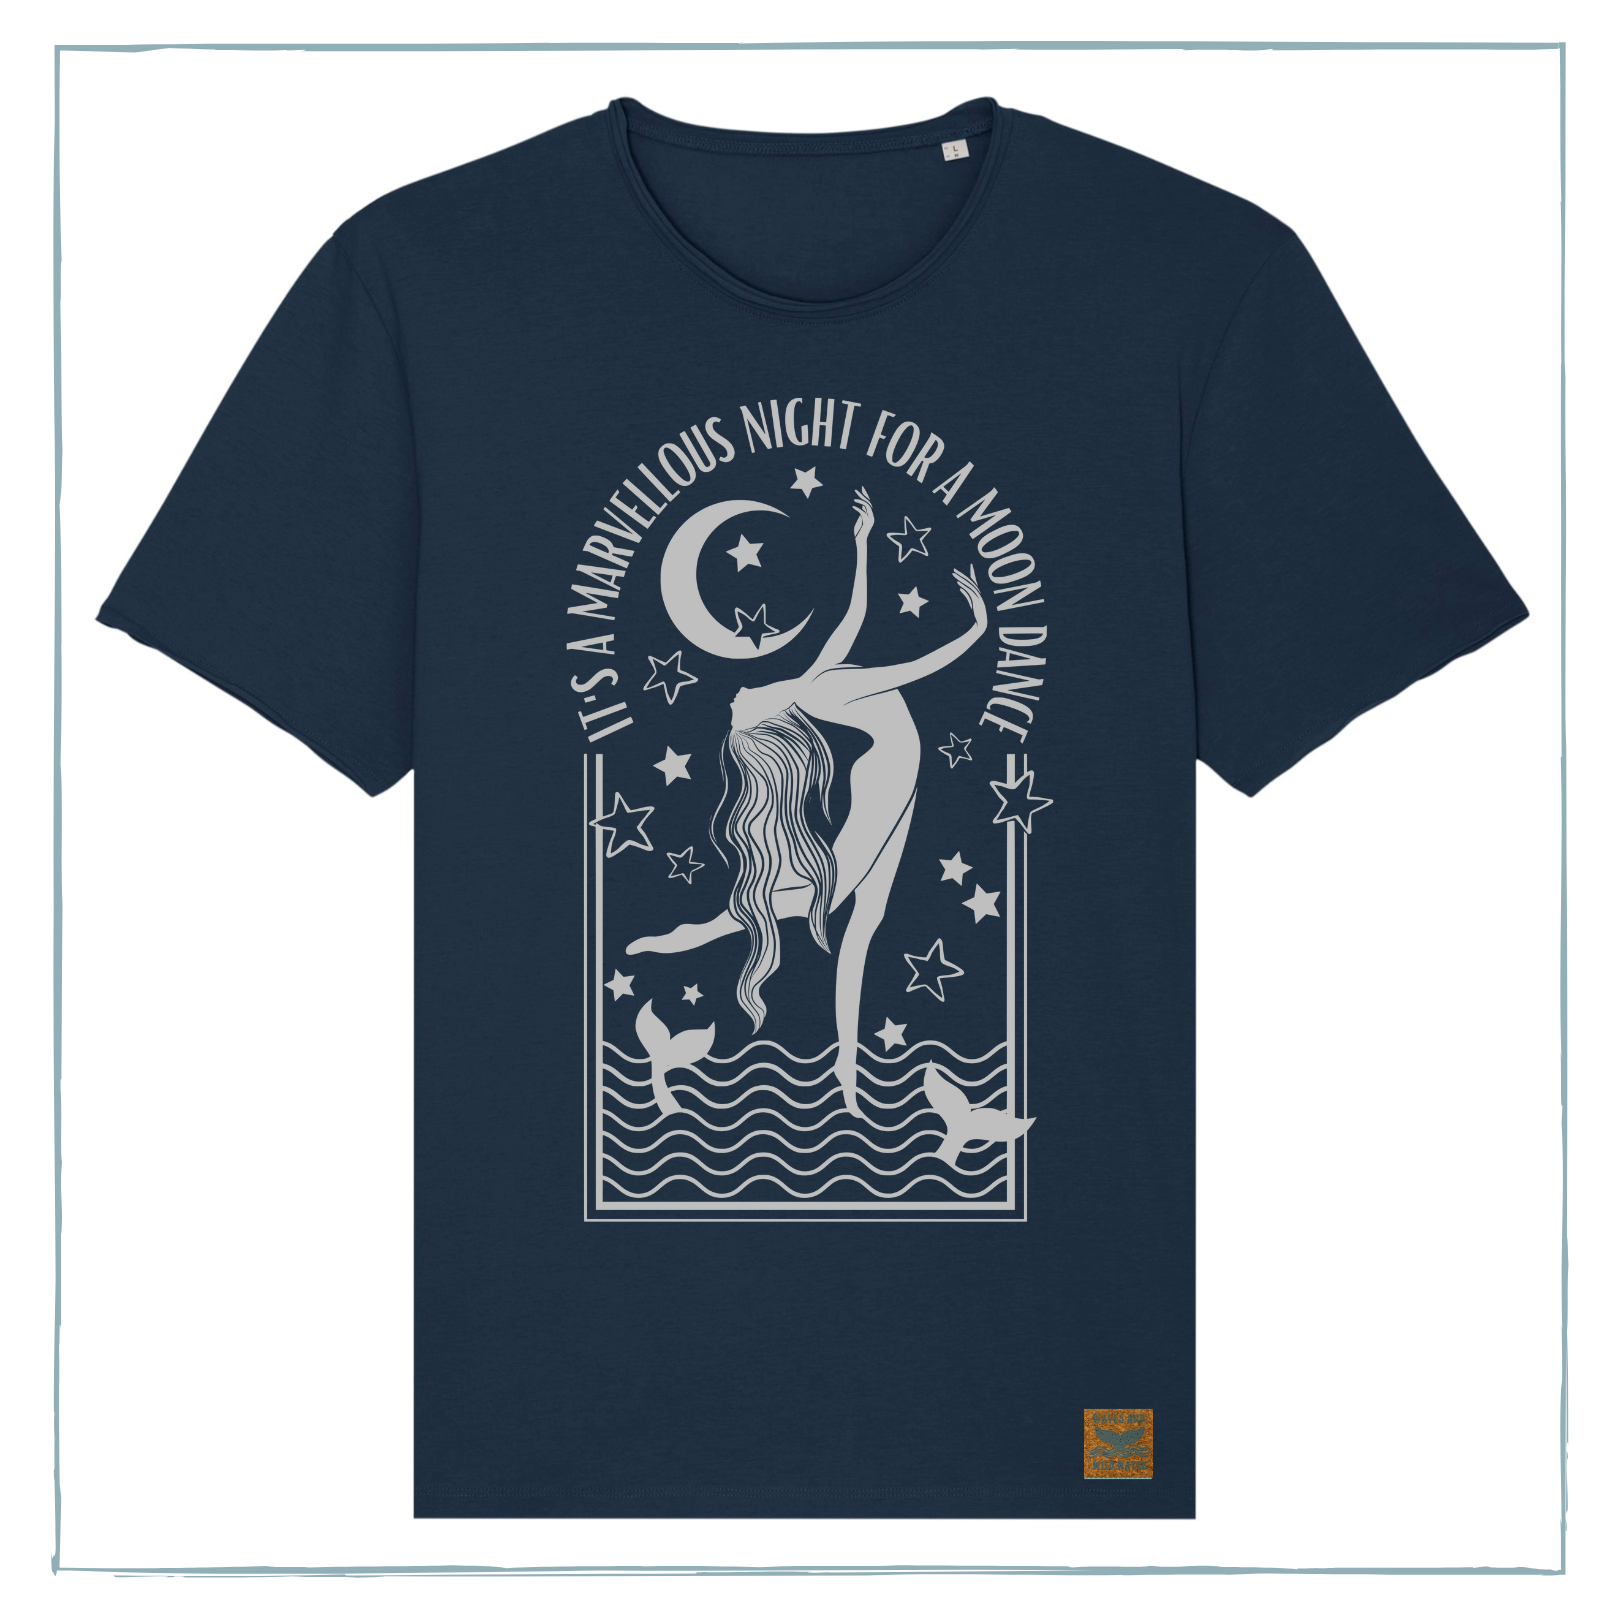 A navy blue t-shirt with a metallic silver printed design, showing a woman dancing in the sea, and the words 'It's a marvellous night for a moon dance'.